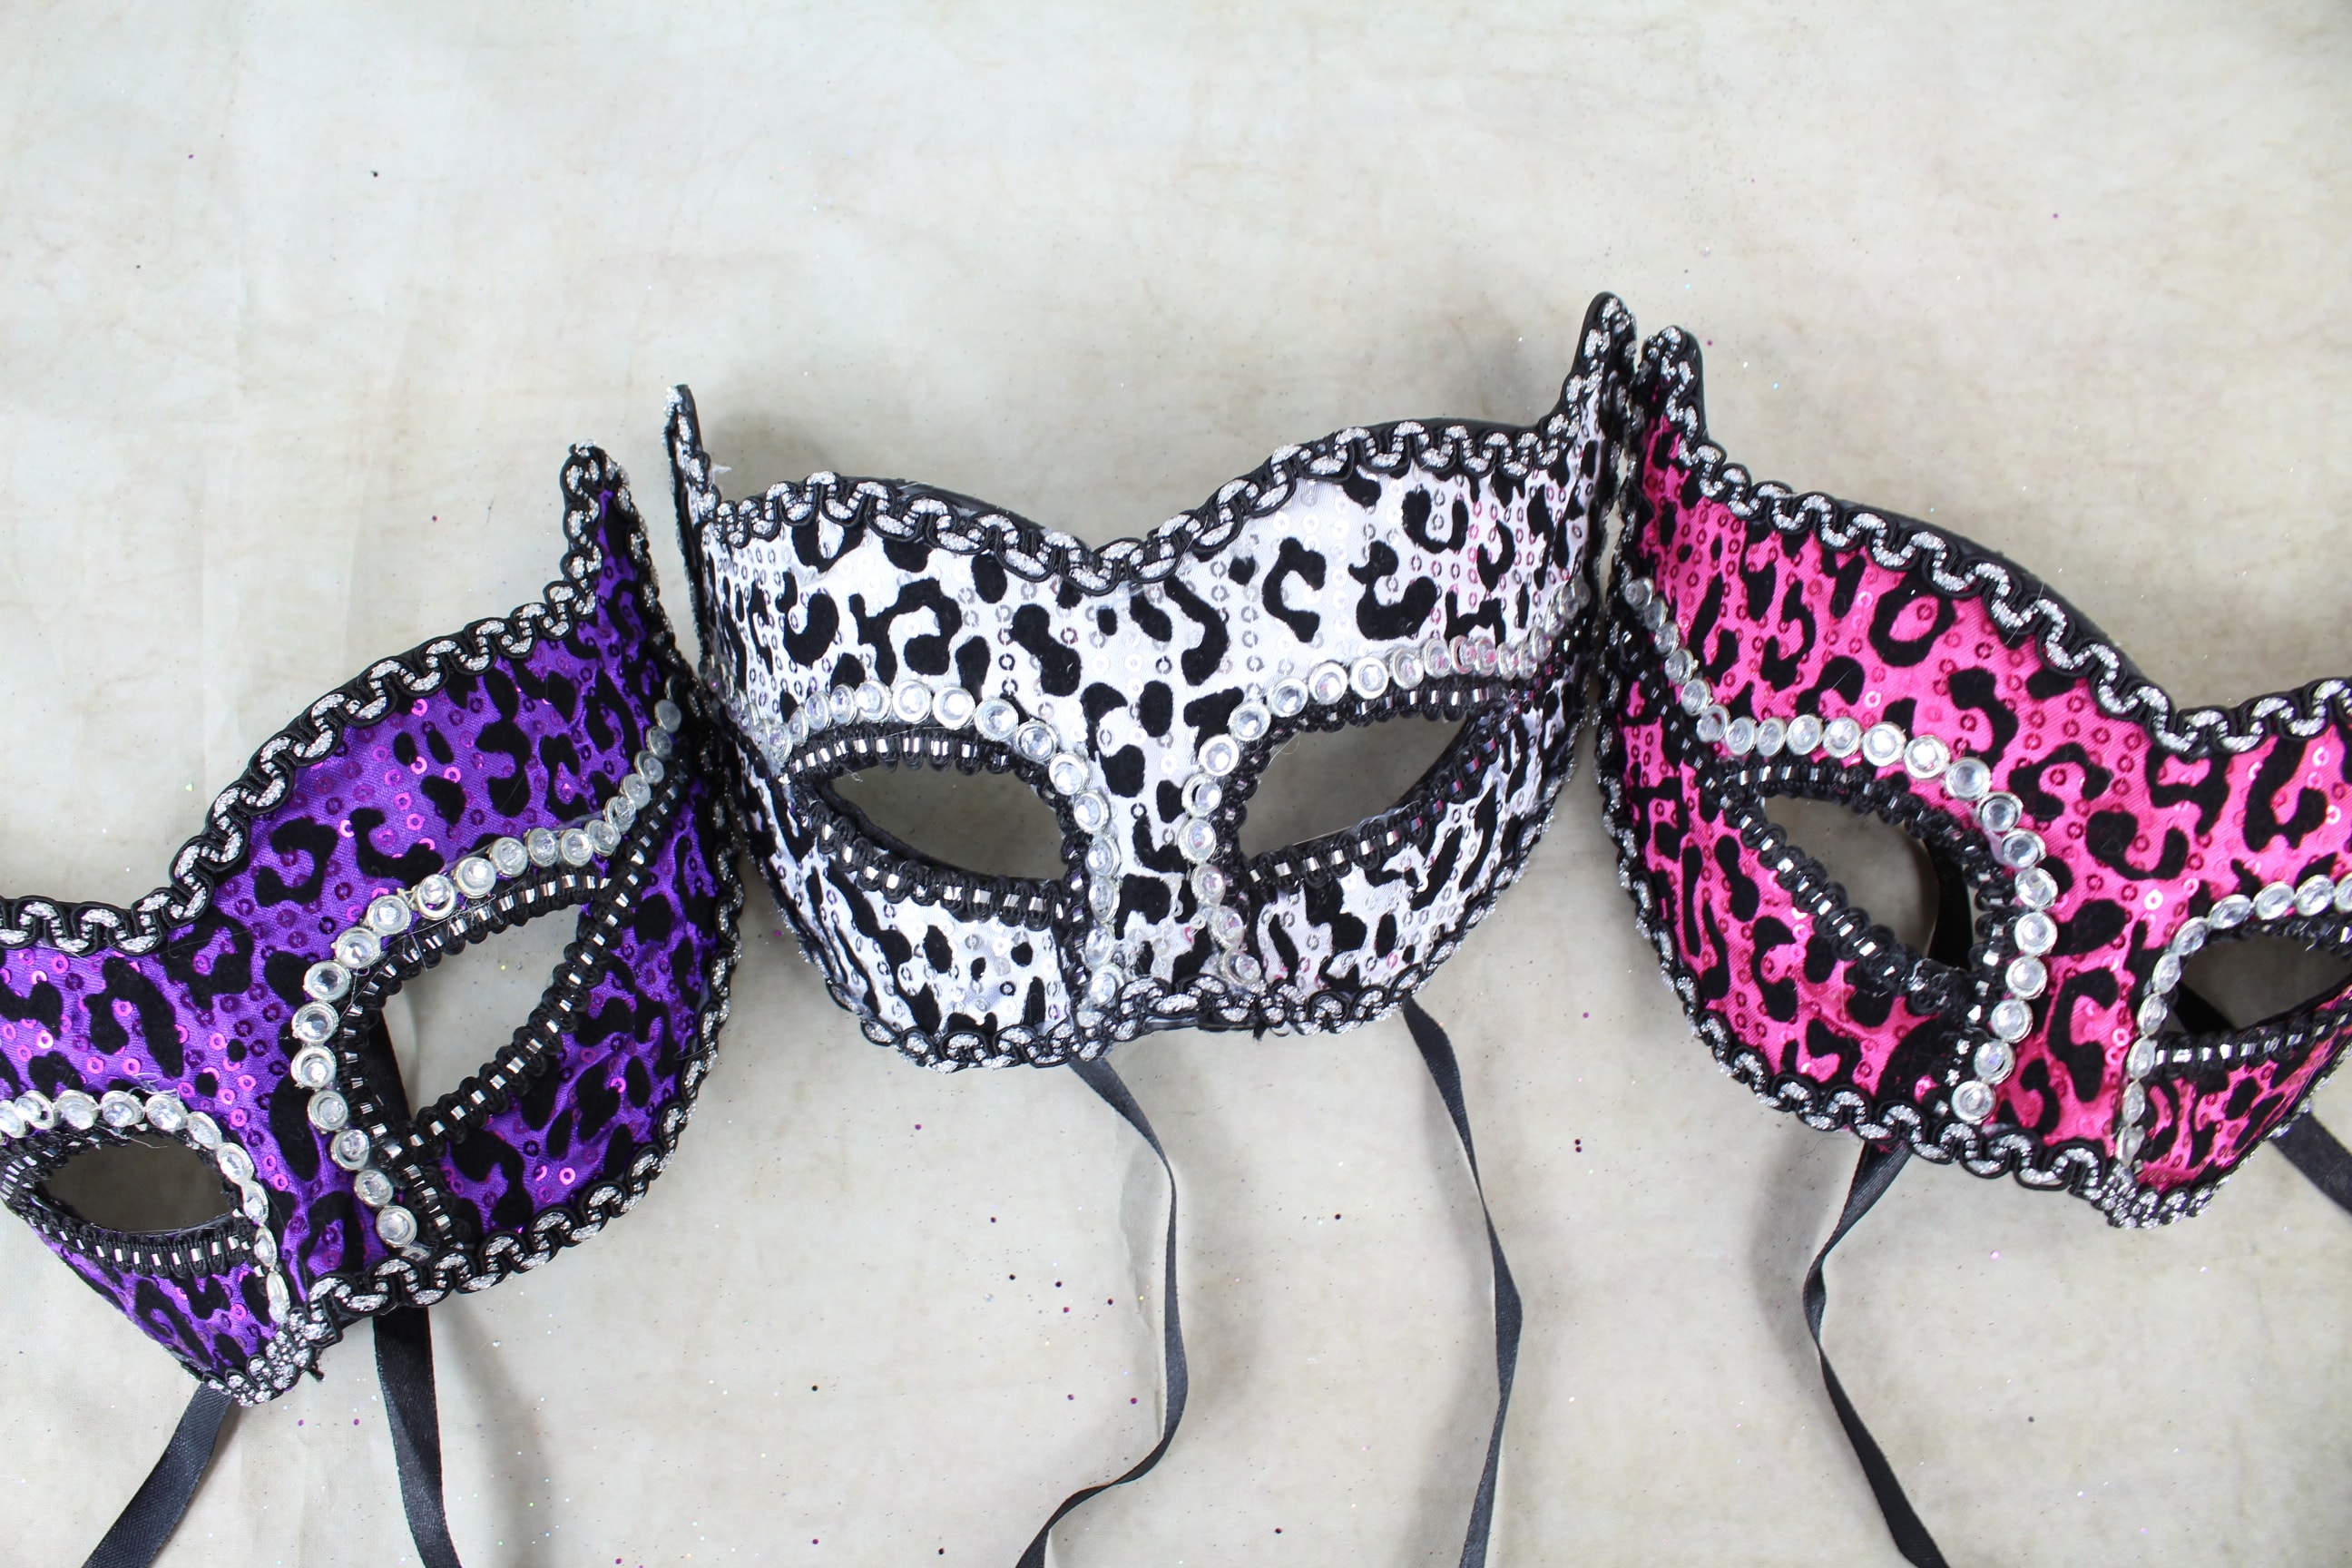 3 x Leopard Print Masks - BUY 3 FOR THE PRICE OF 2!